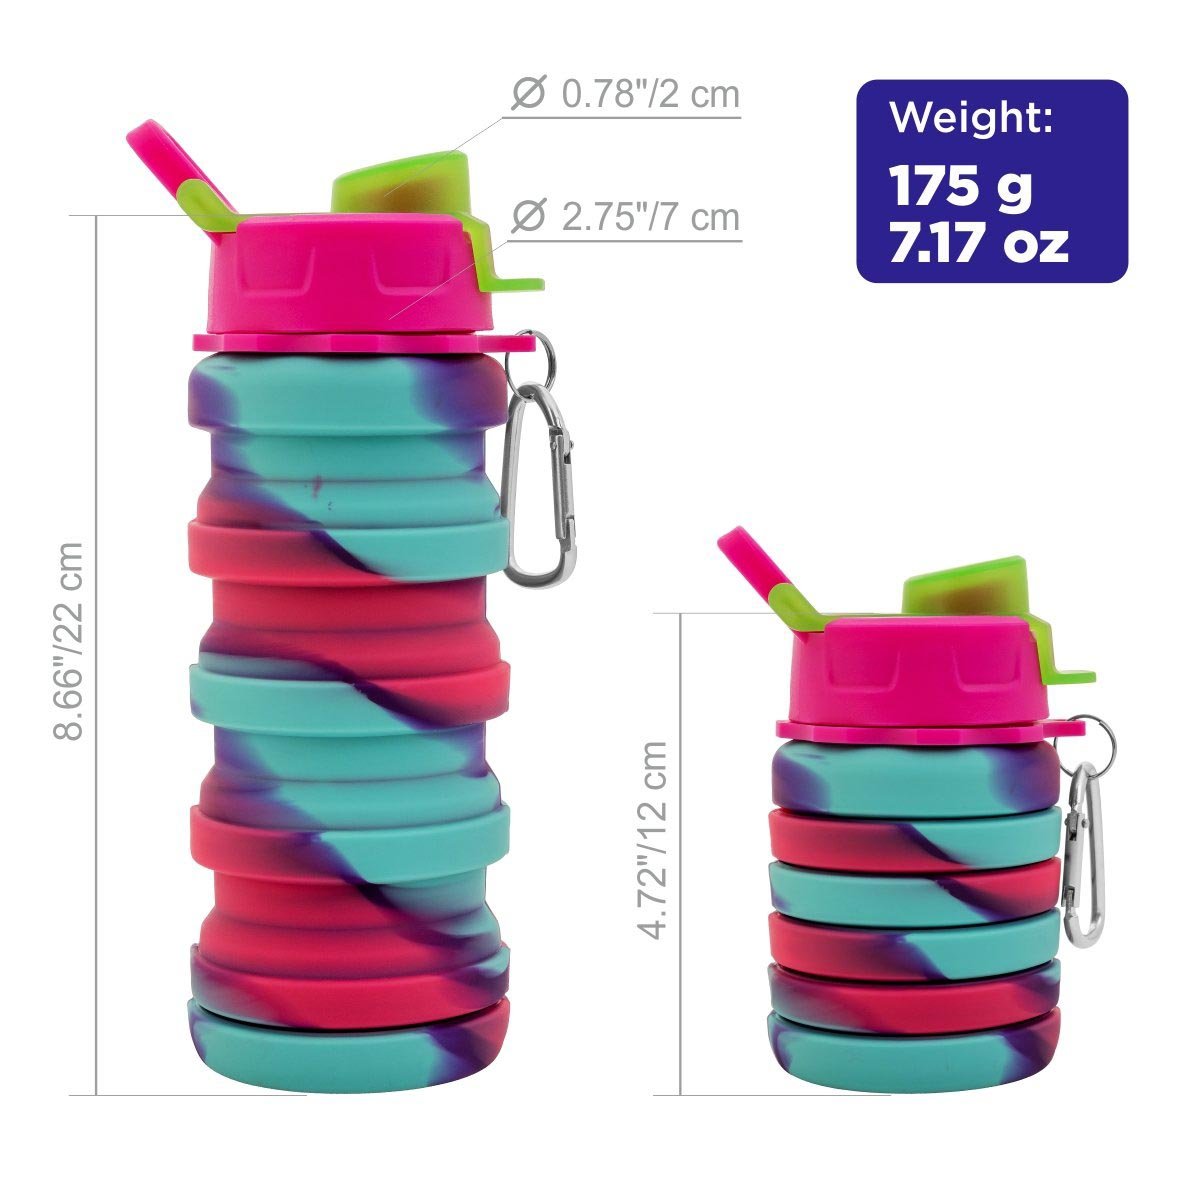 Portable Collapsible Silicone Water Bottle with a Straw Lid, 16 oz is collapsible, thus cutting its length from 8.66 to 4.72 inches. It weighs 7 oz. 